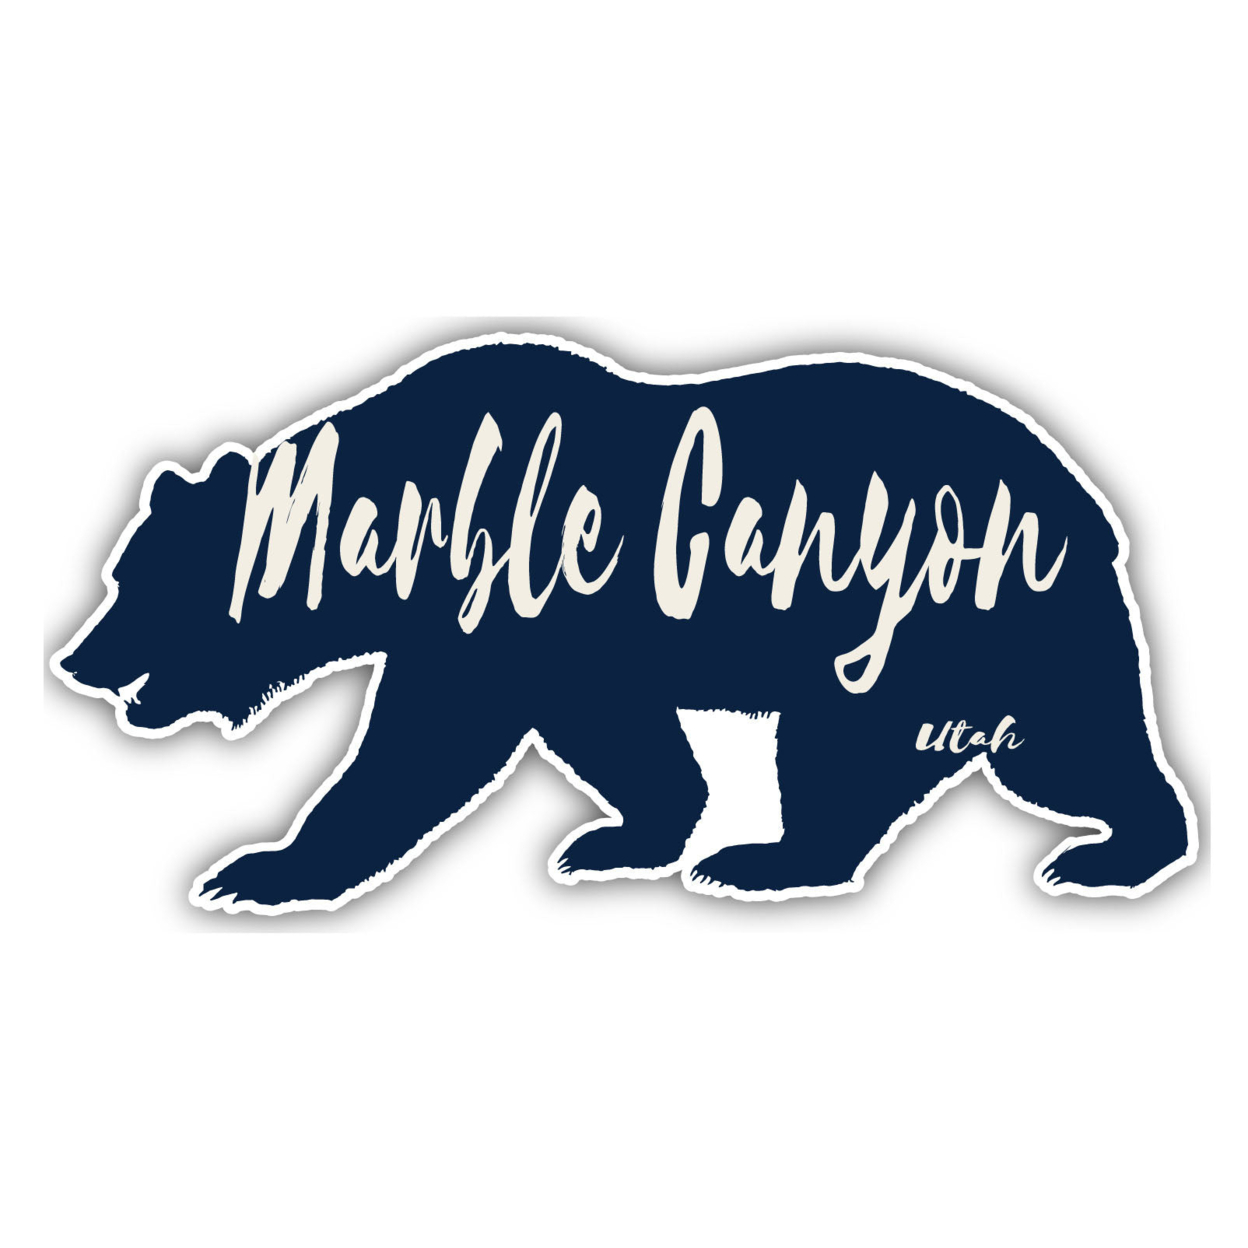 Marble Canyon Utah Souvenir Decorative Stickers (Choose Theme And Size) - 4-Inch, Bear